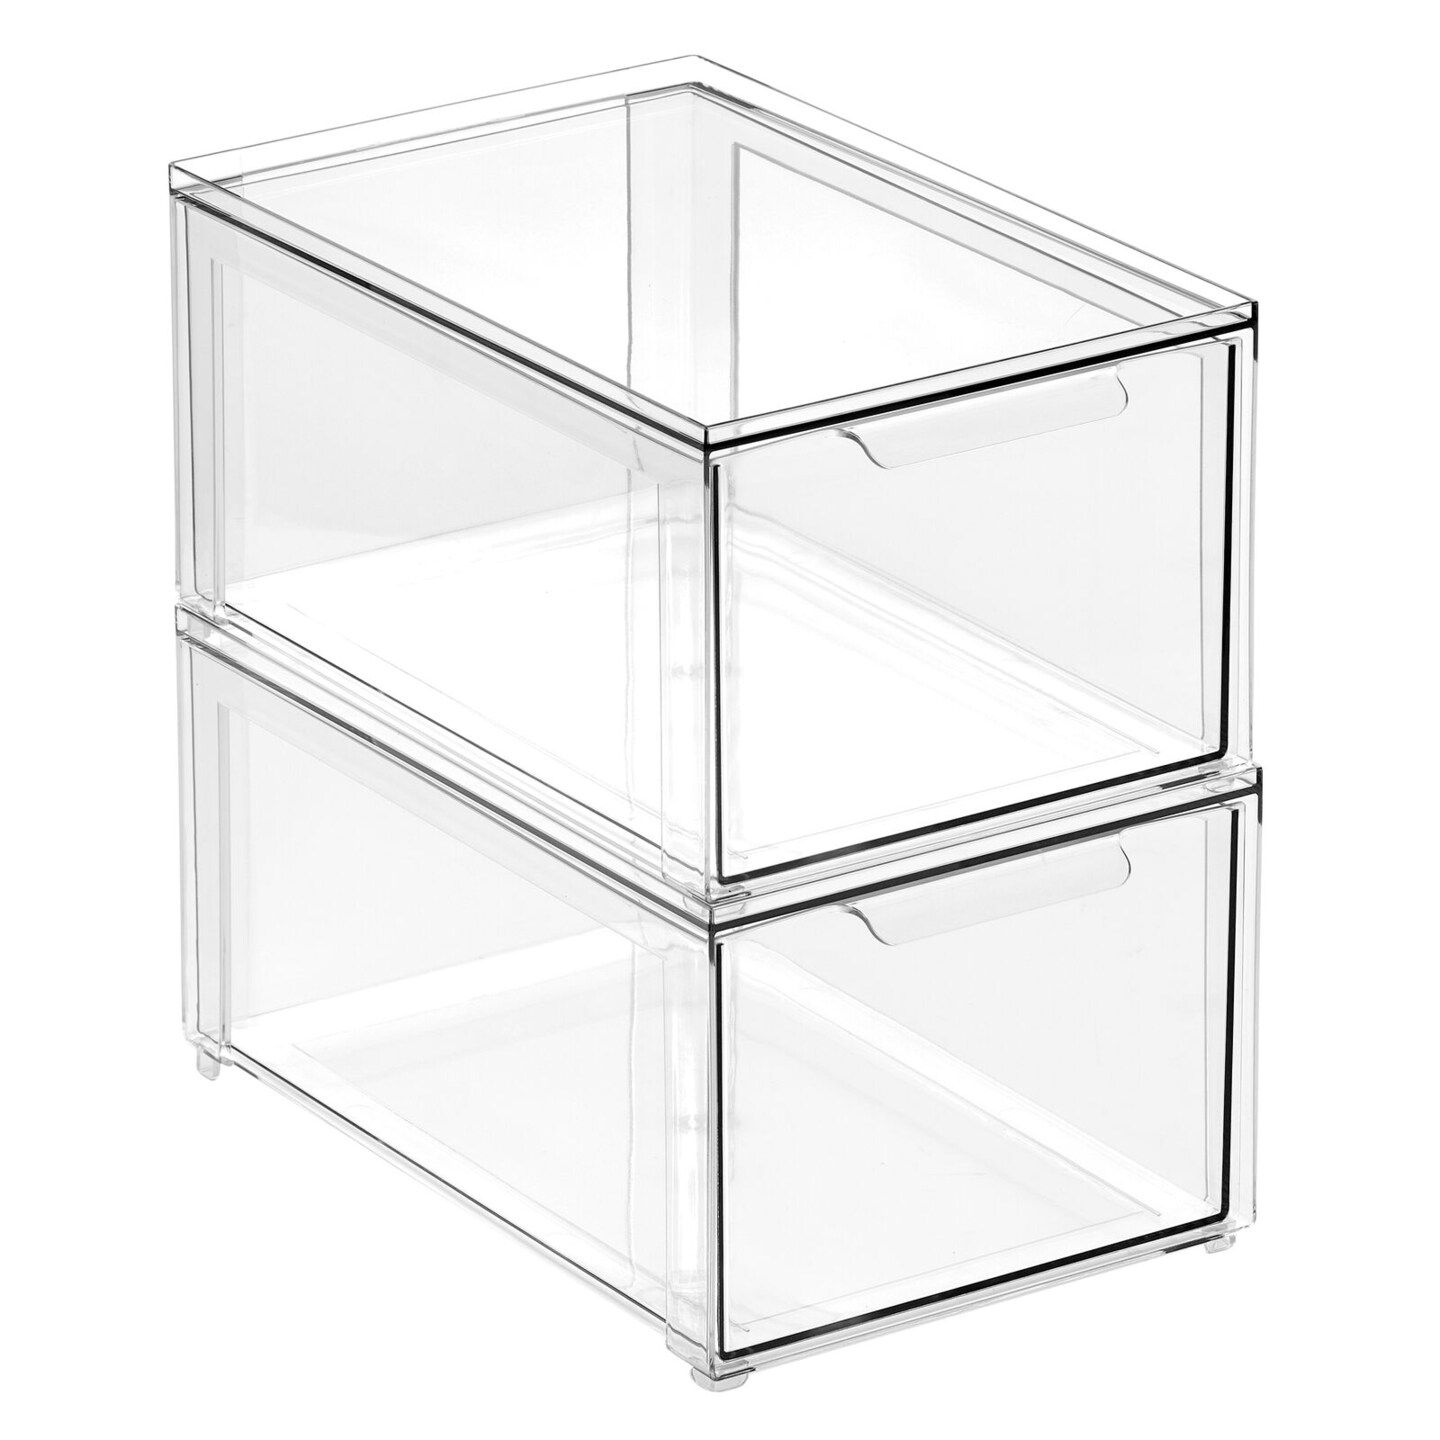 mDesign Plastic Stackable Kitchen Storage Bin, Pull-Out Drawer - 2 Pack, Clear